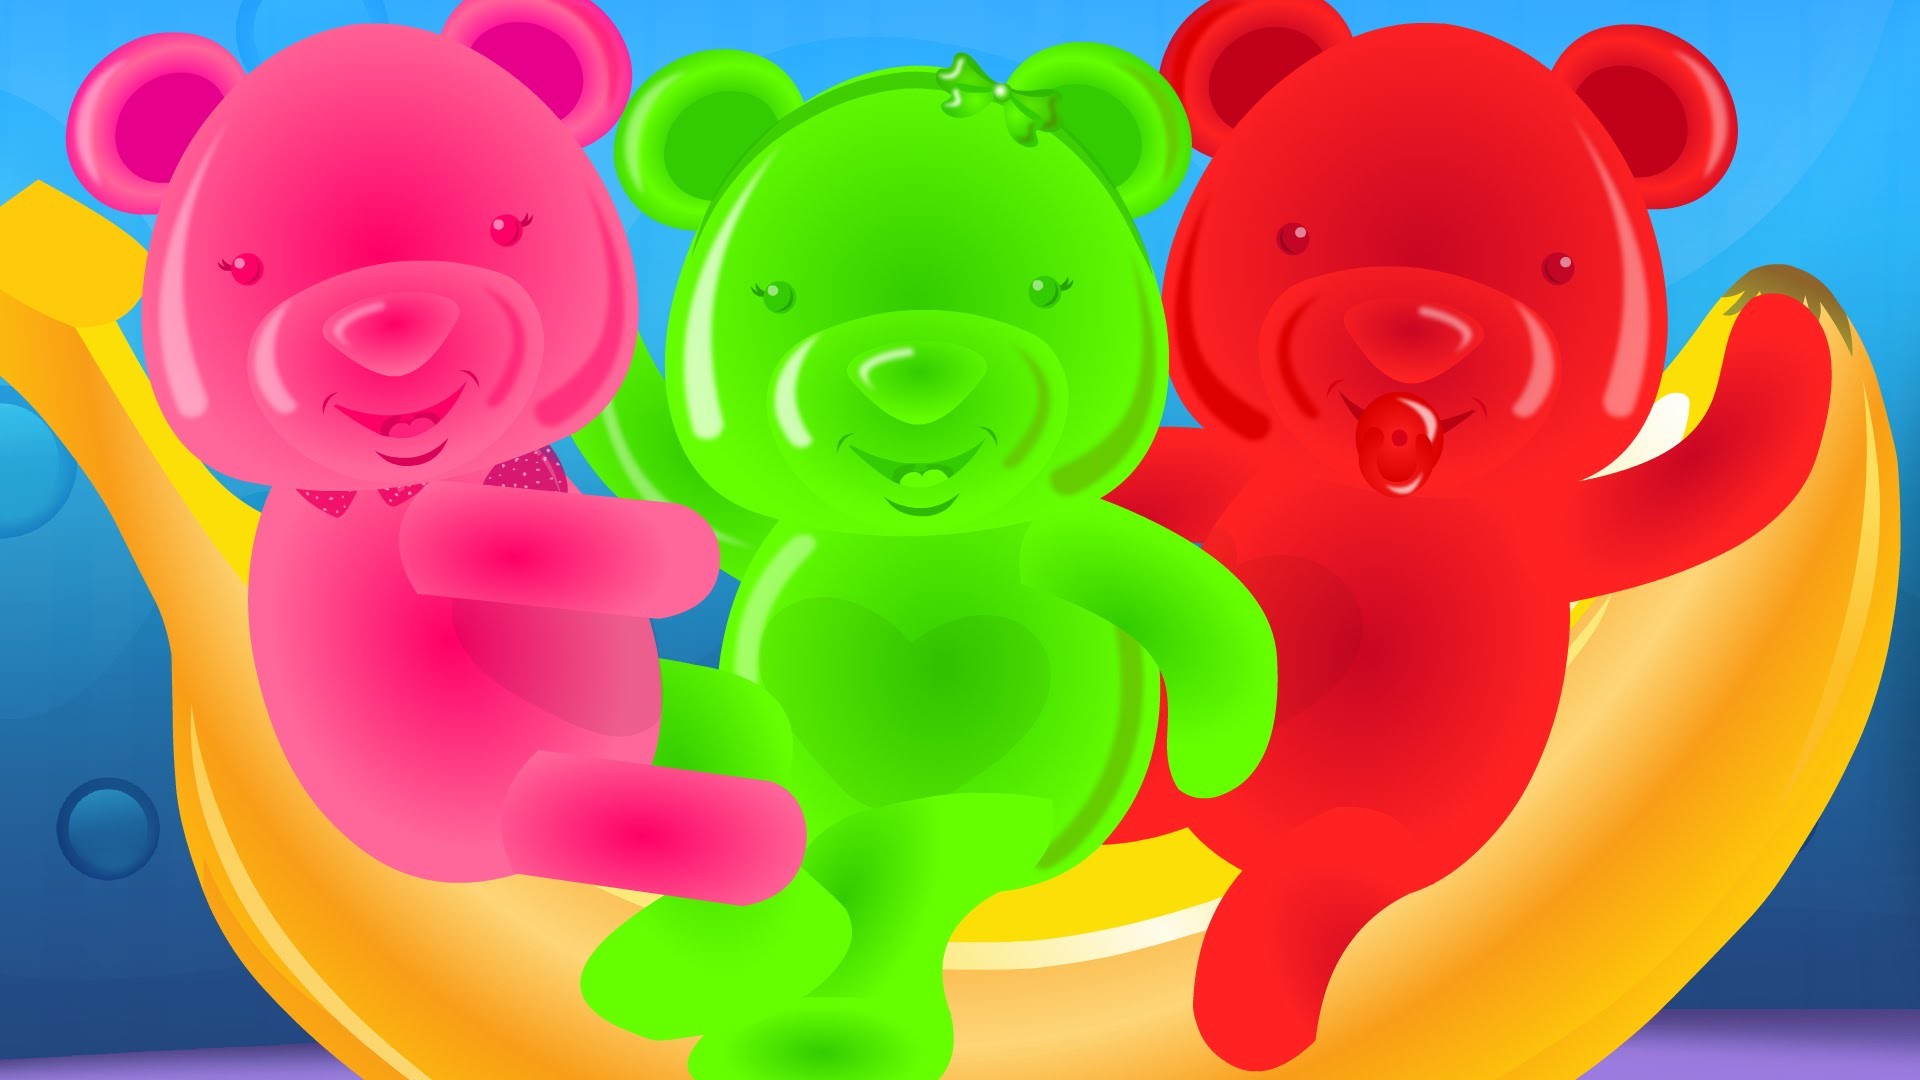 Five Little Jelly Bears Nursery Rhymes For Kids And Children Songs – YouTube